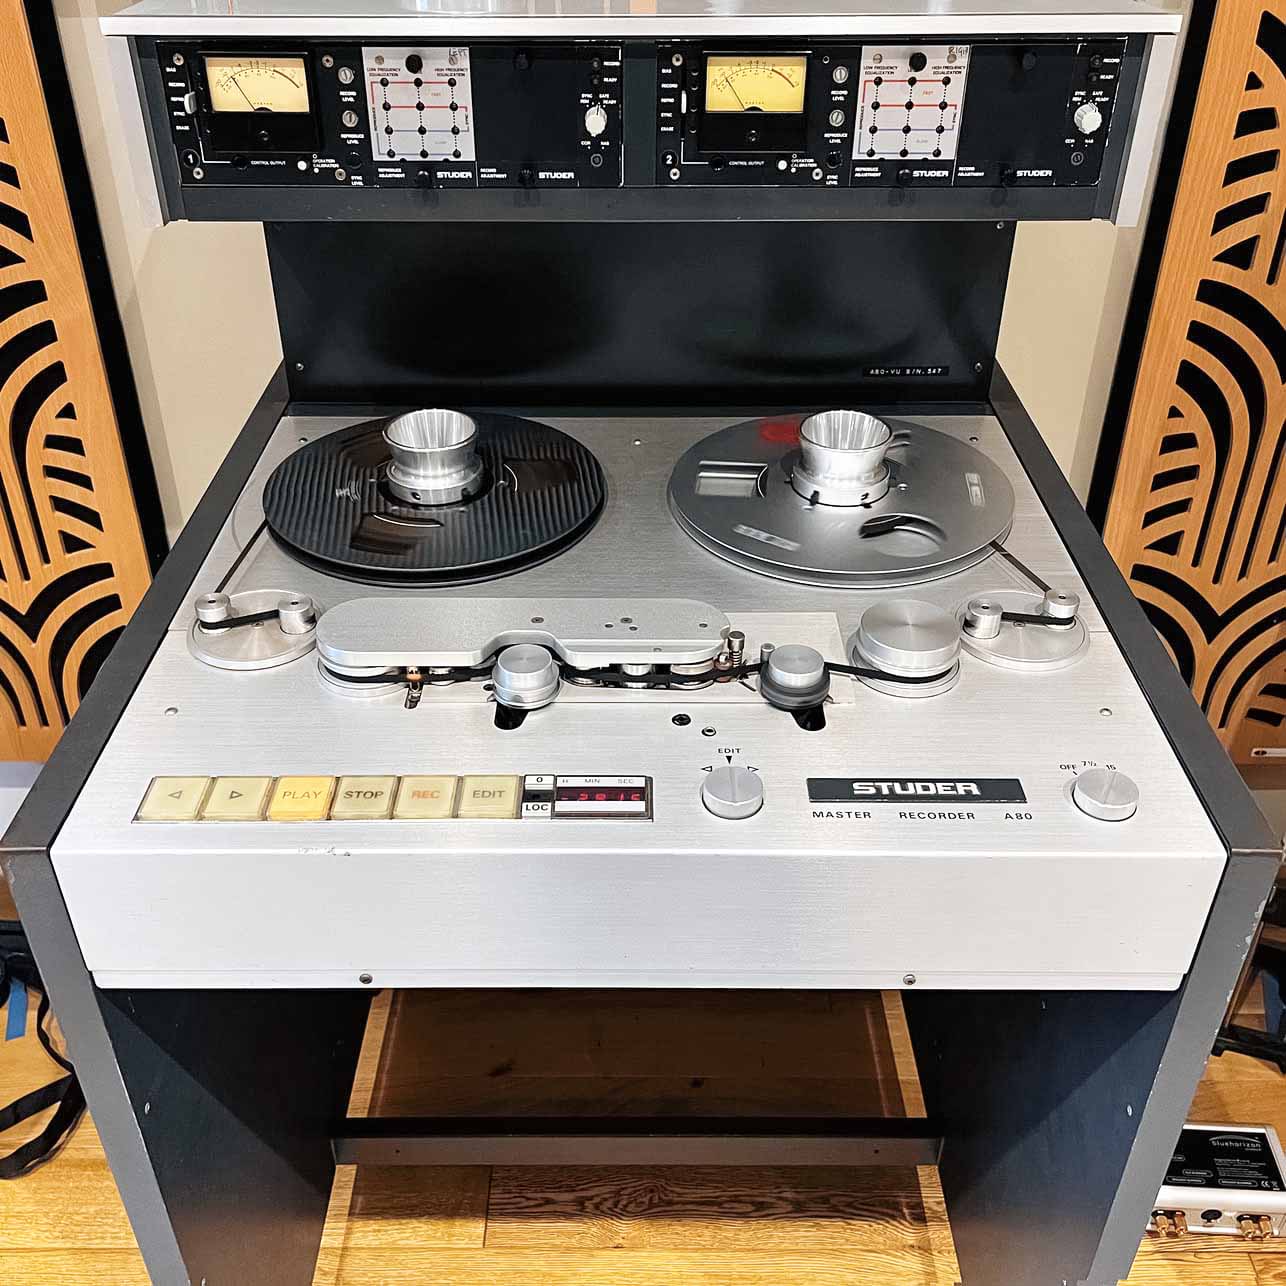 Sonorus Audio ATR10 mkII For Sale  New Reel to Reel Tape Deck - RX Reels